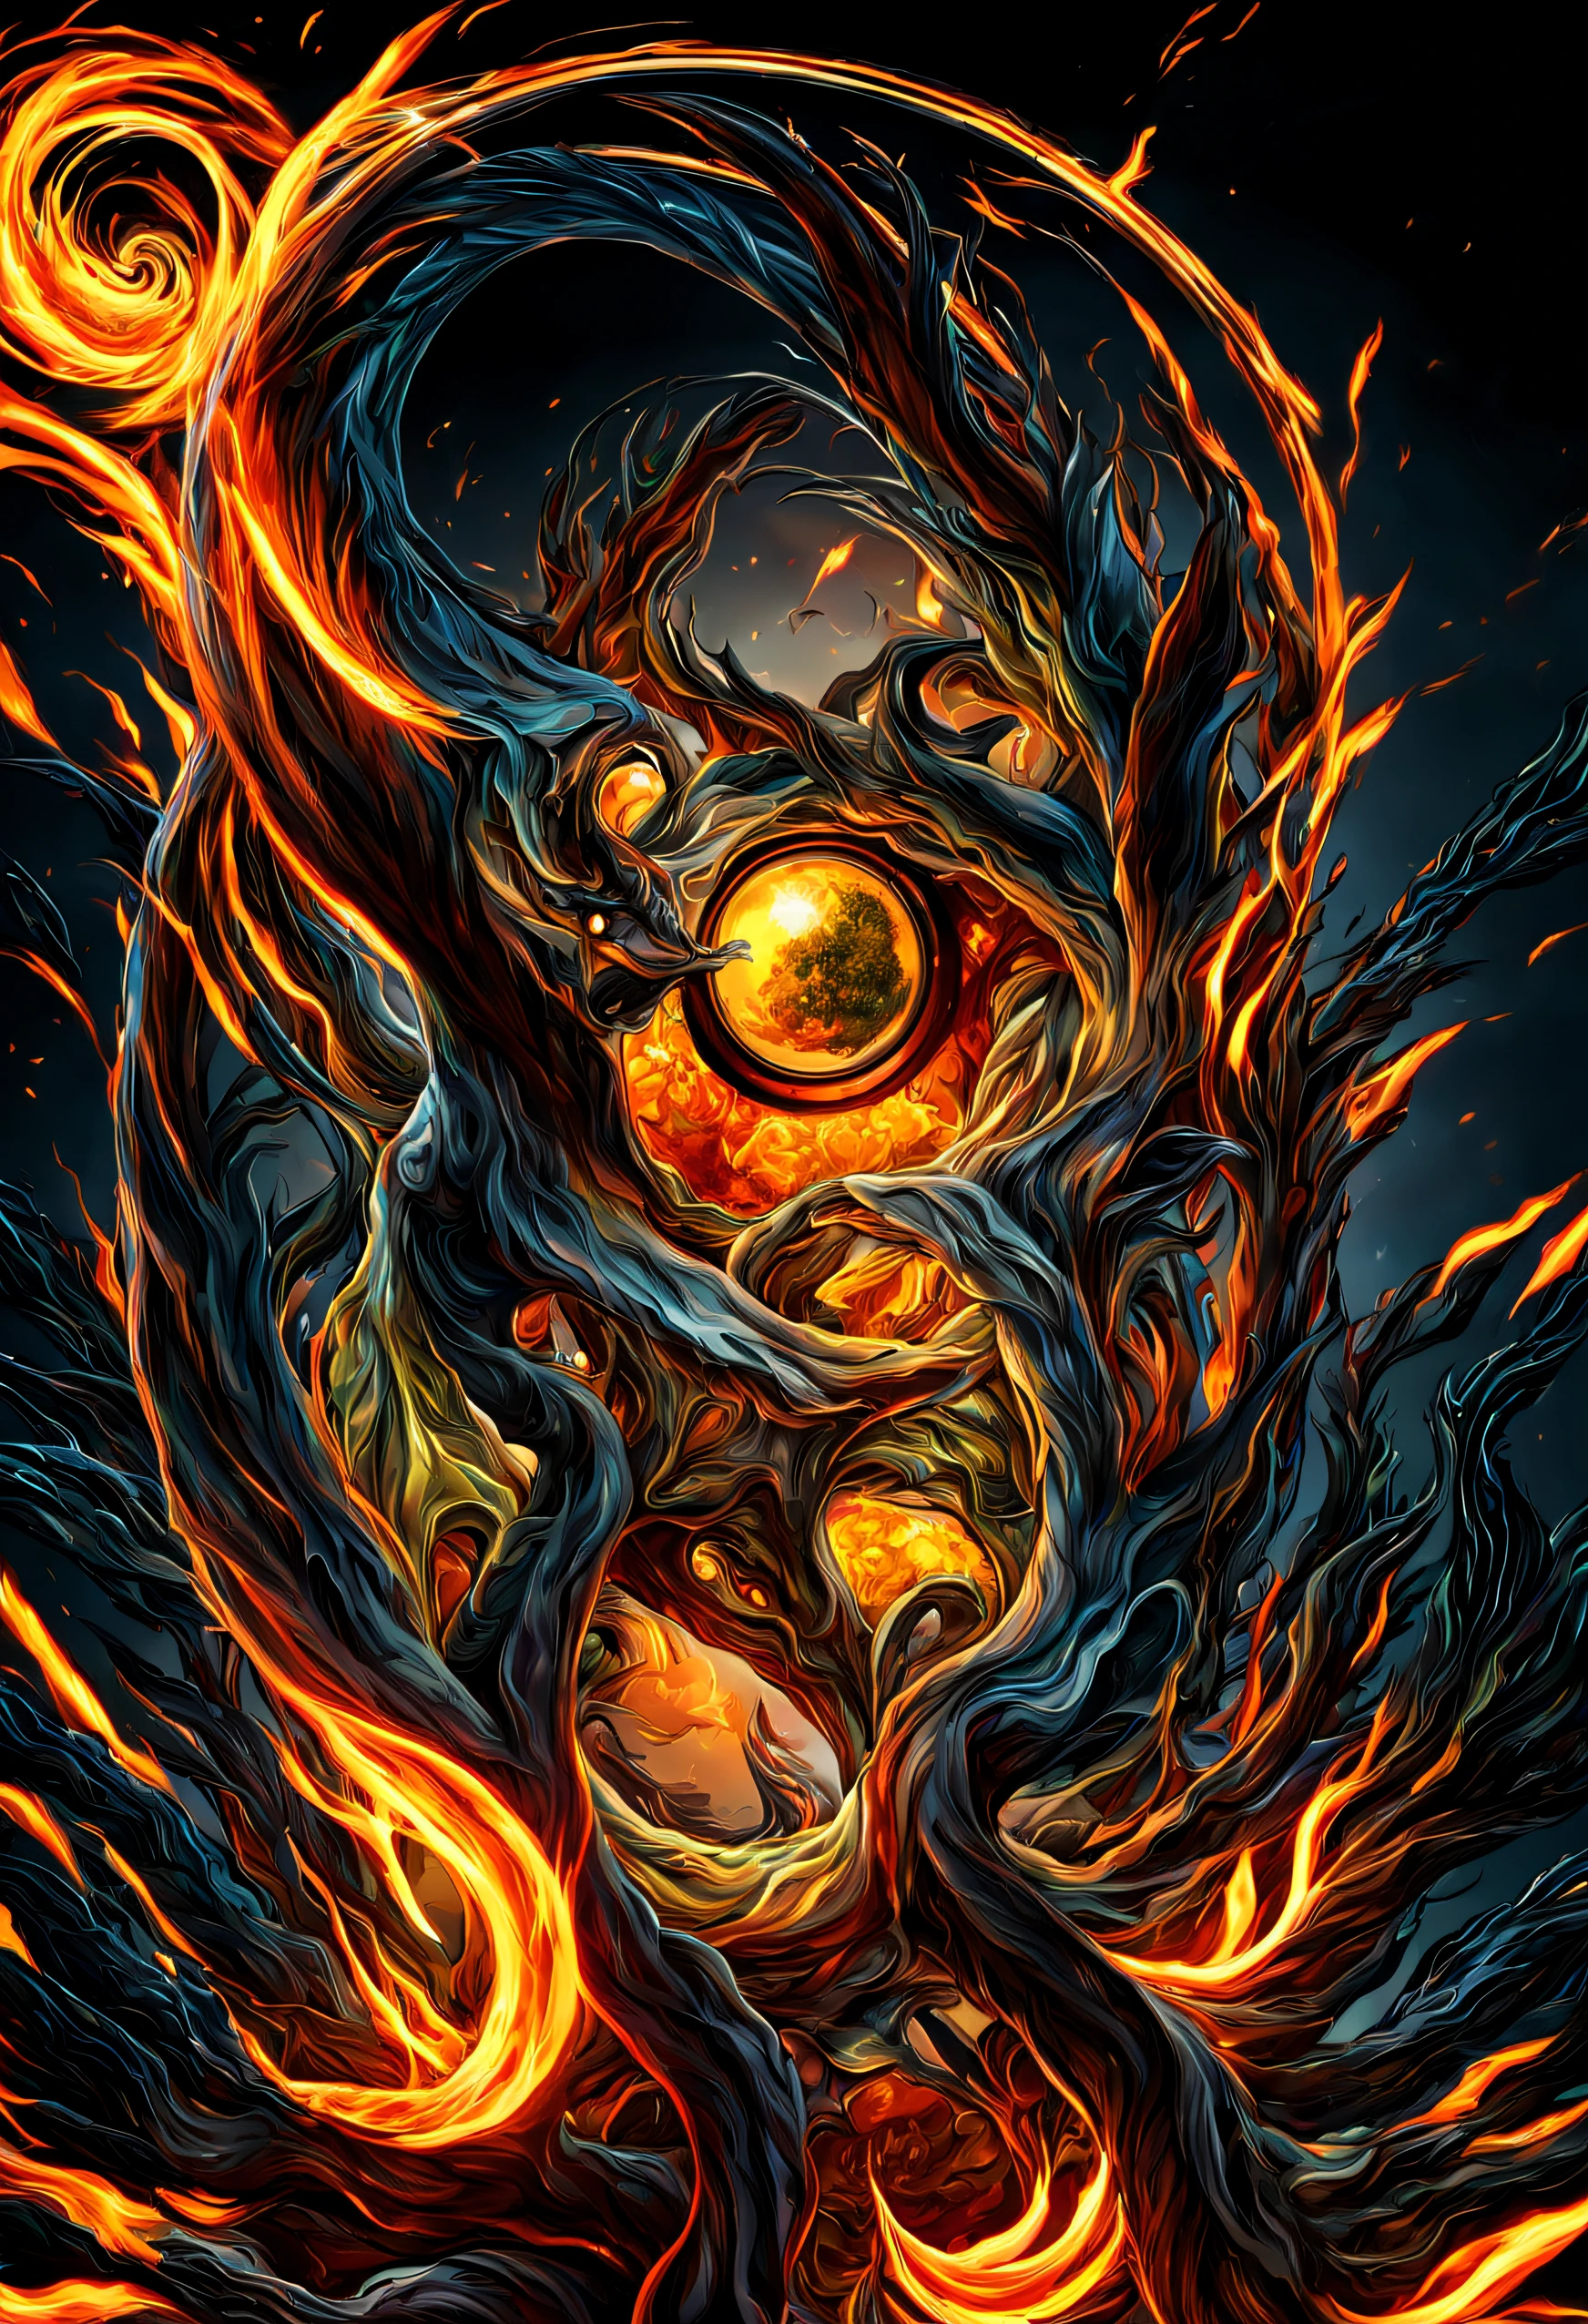 The flame burns in a circle, fiery, Icon with fire halo, Ring of Fire, balls of fire, , Orange flame in the background, One guy, Fire type, (Fiery), Black fireball, Farenado, Flame Hell, hell, fire theme, Fiery, Hellfire, hell, flashy, Molten glass ball image，There is scenery inside, Detailed digital 3D artwork, tree of life inside the ball, Highly Detailed 4K Digital Art, Advanced digital art, stylized digital art, highly detailed digital painting, glass orbs, highly detailed digital painting, Advanced digital art, 3d rendering beep sound, 8k impression art